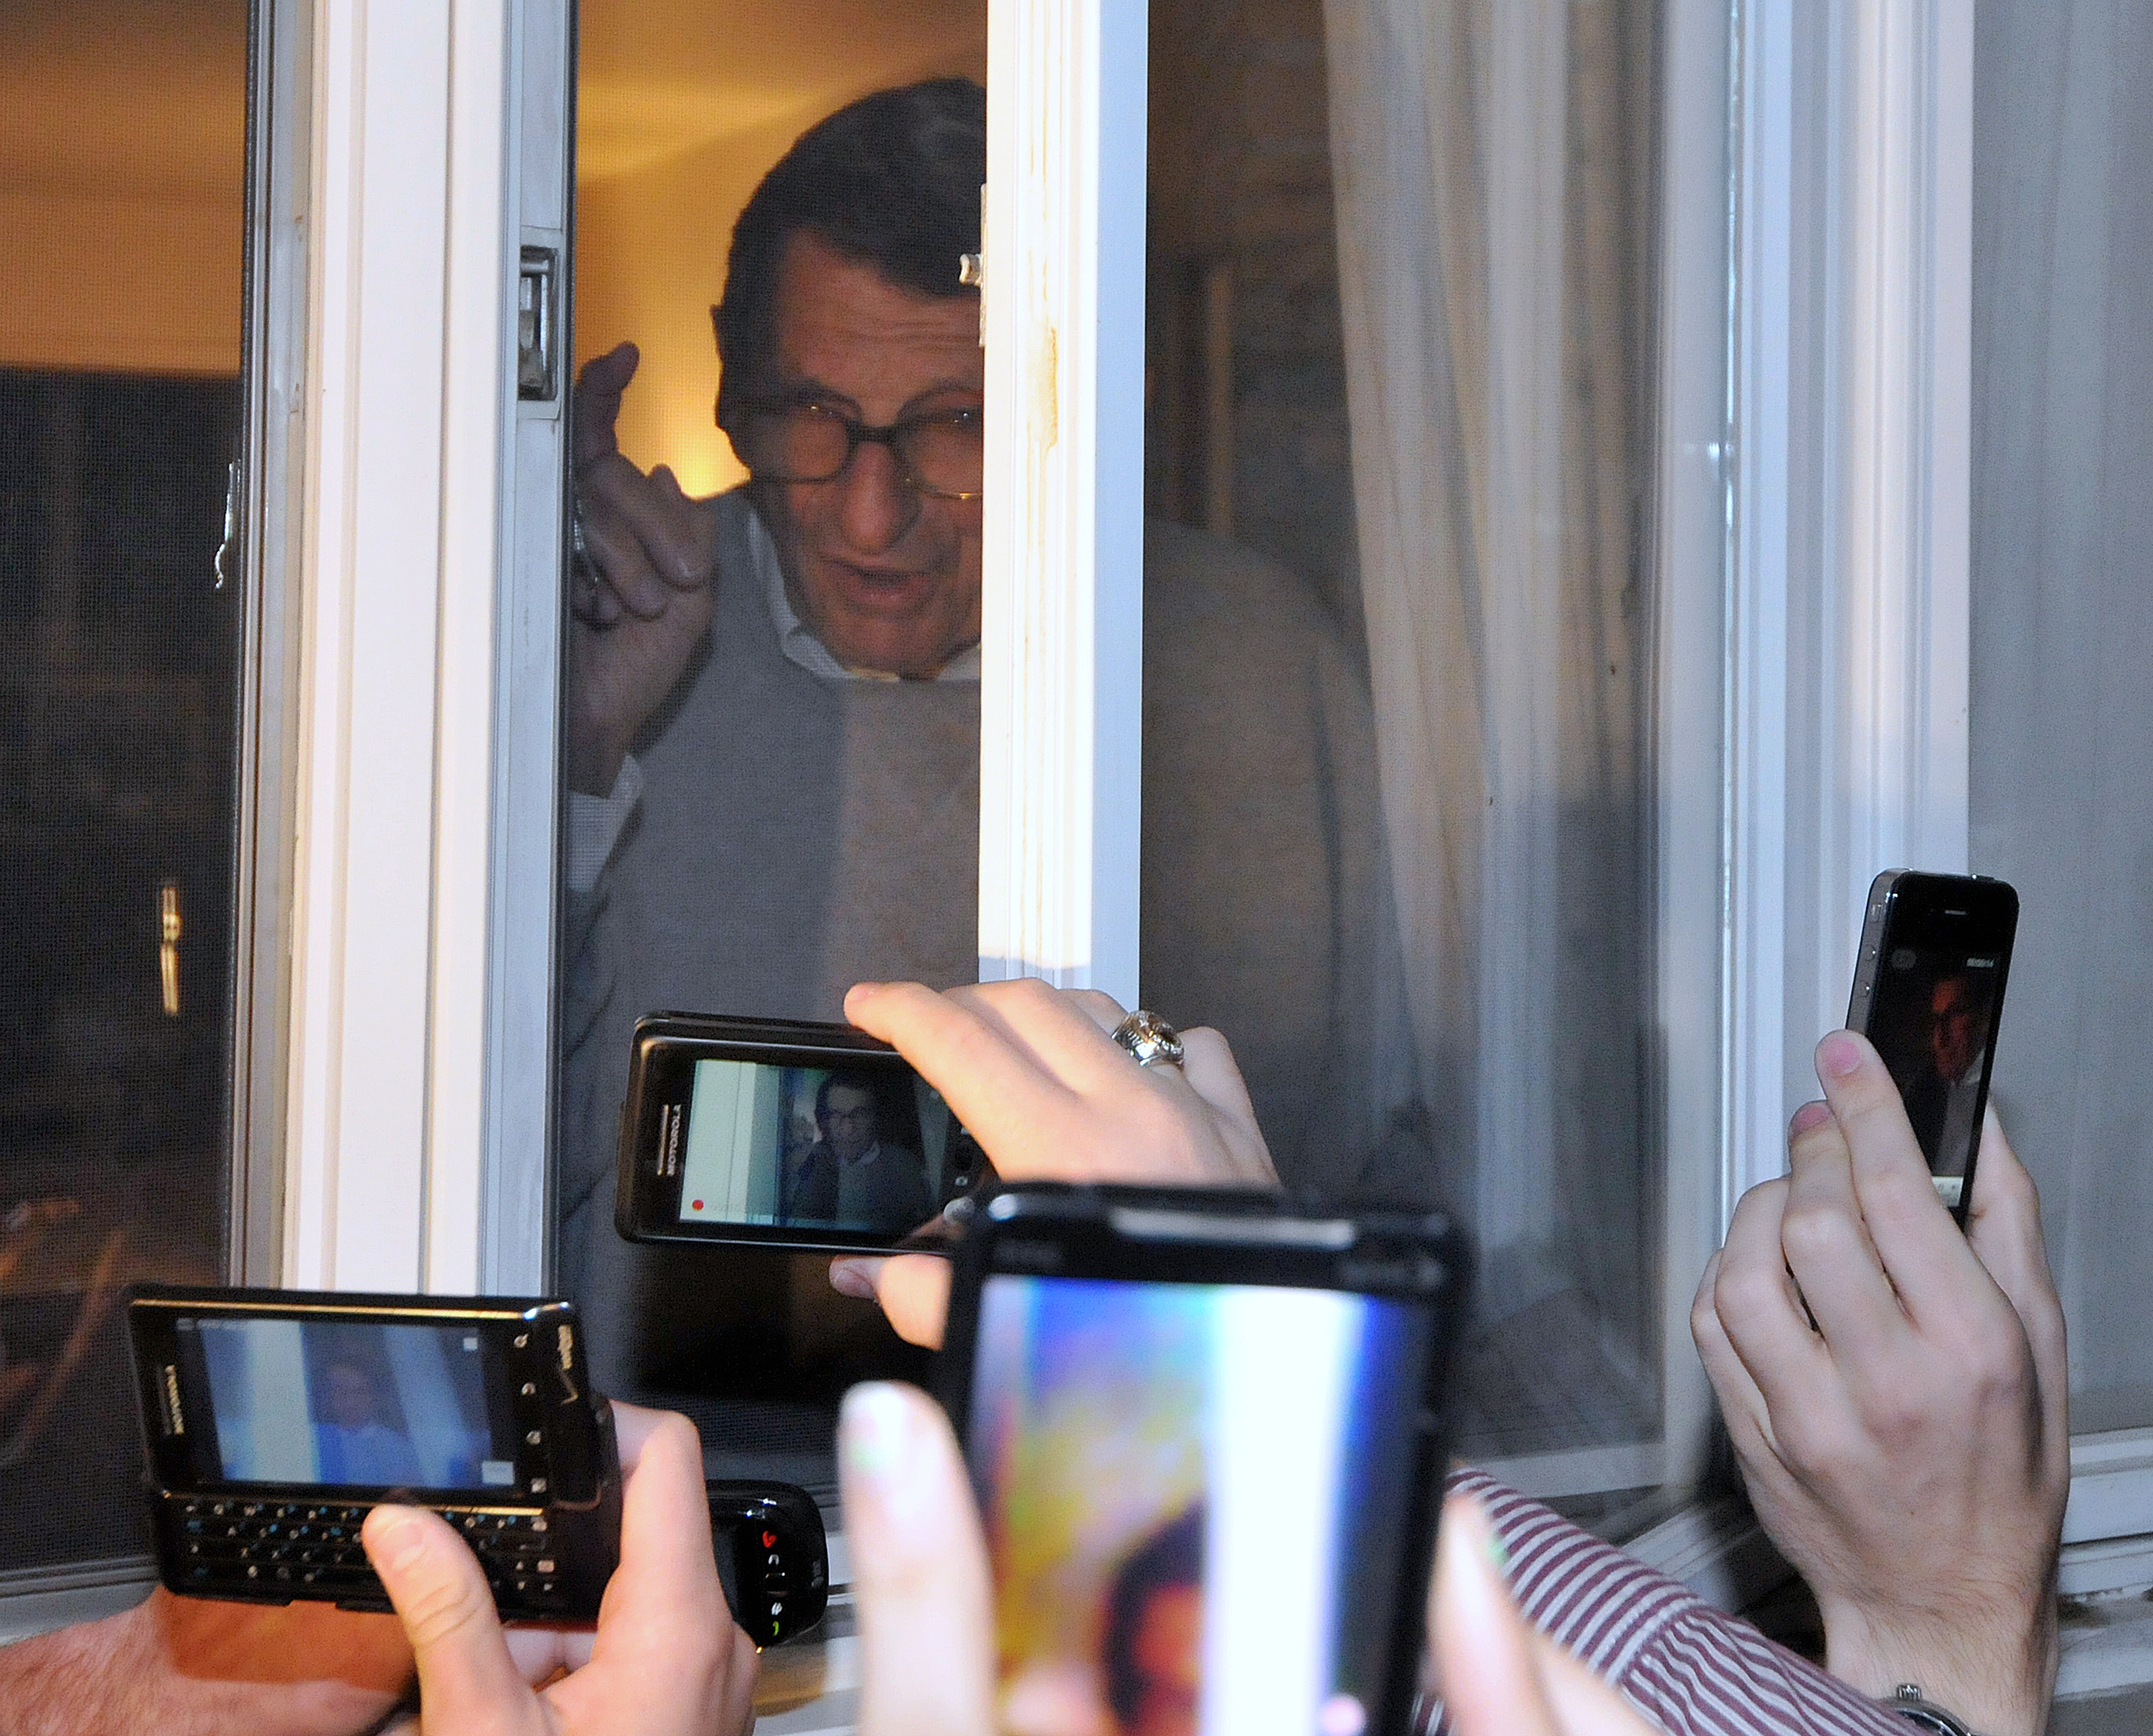  Head coach Joe Paterno speaks to fans and media from inside his window on Tuesday night. A group of about 300 people gathered in support of Paterno. 